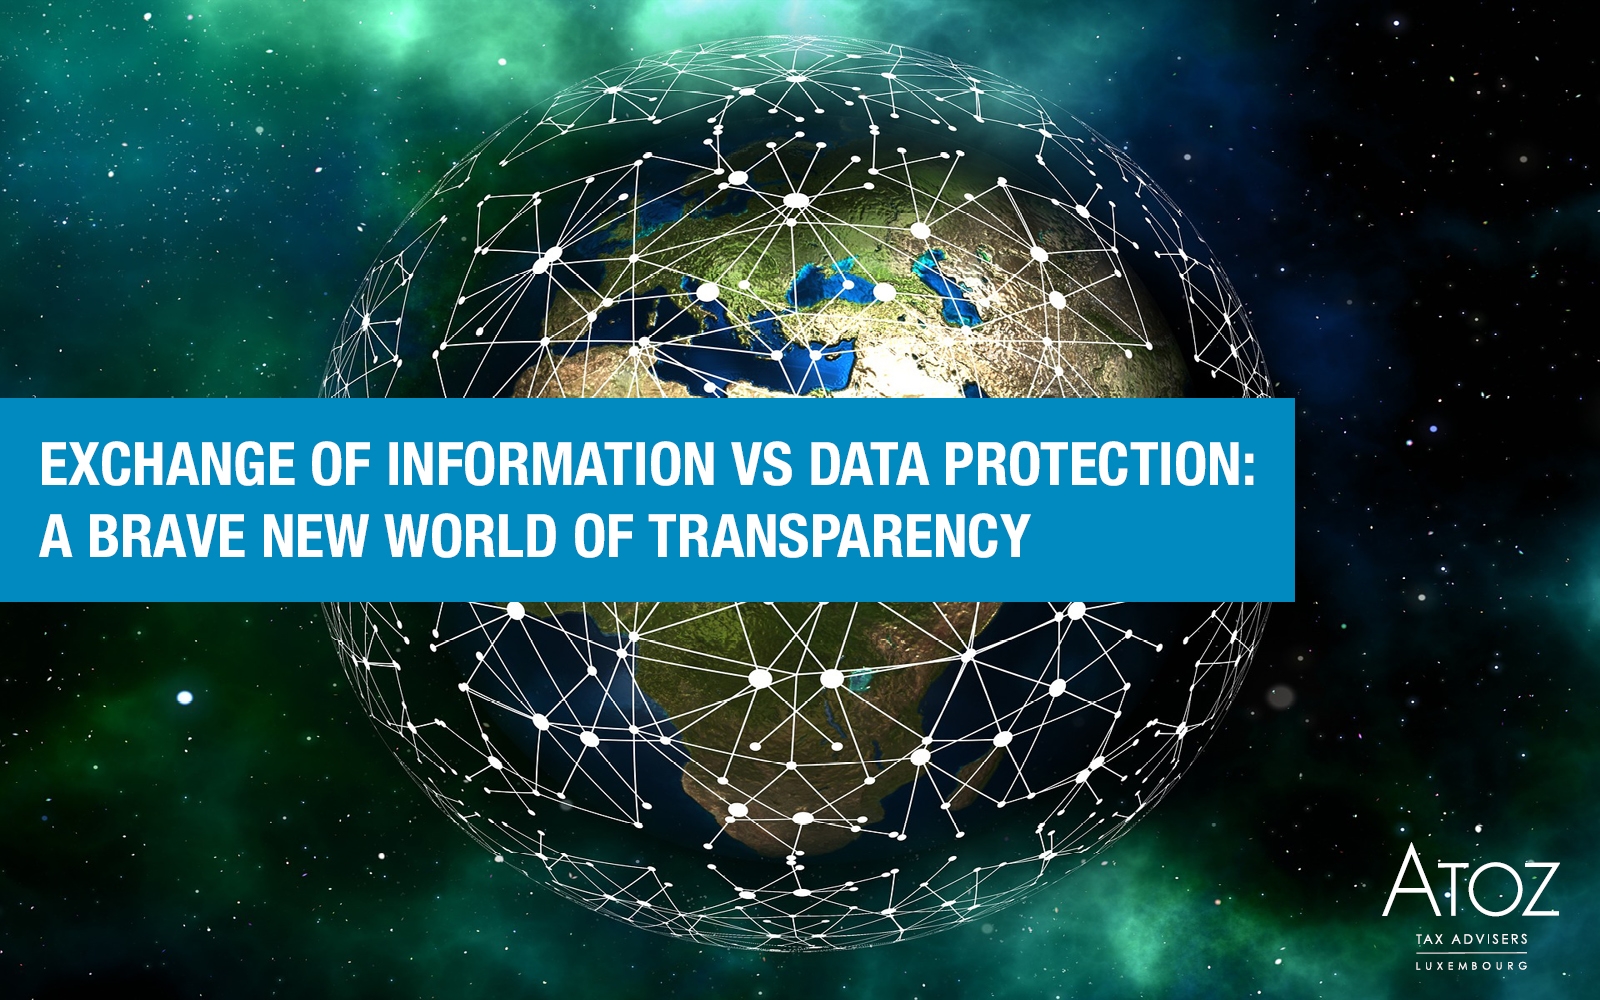 Exchange of information vs data protection: A brave new world of transparency